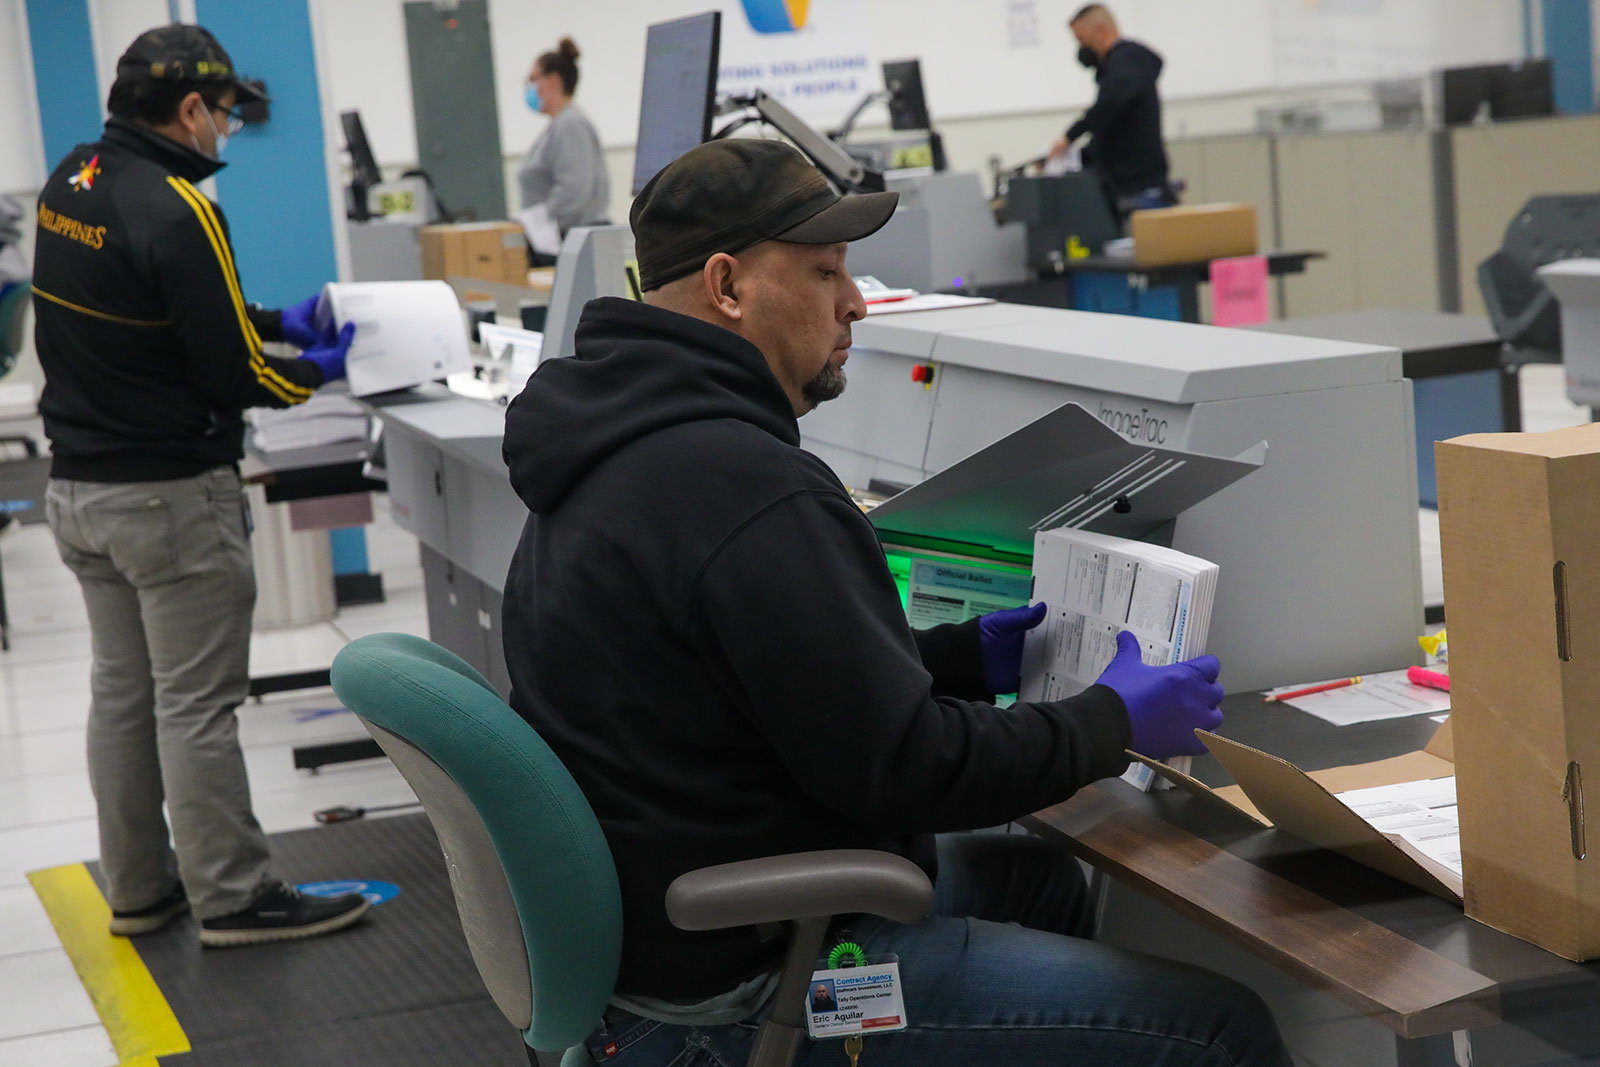 Eric Aguilar works on ballot scanning and tabulation of votes at the Voting Solutions for All People (VSAP) tally room on November 11 in Downey, California. 